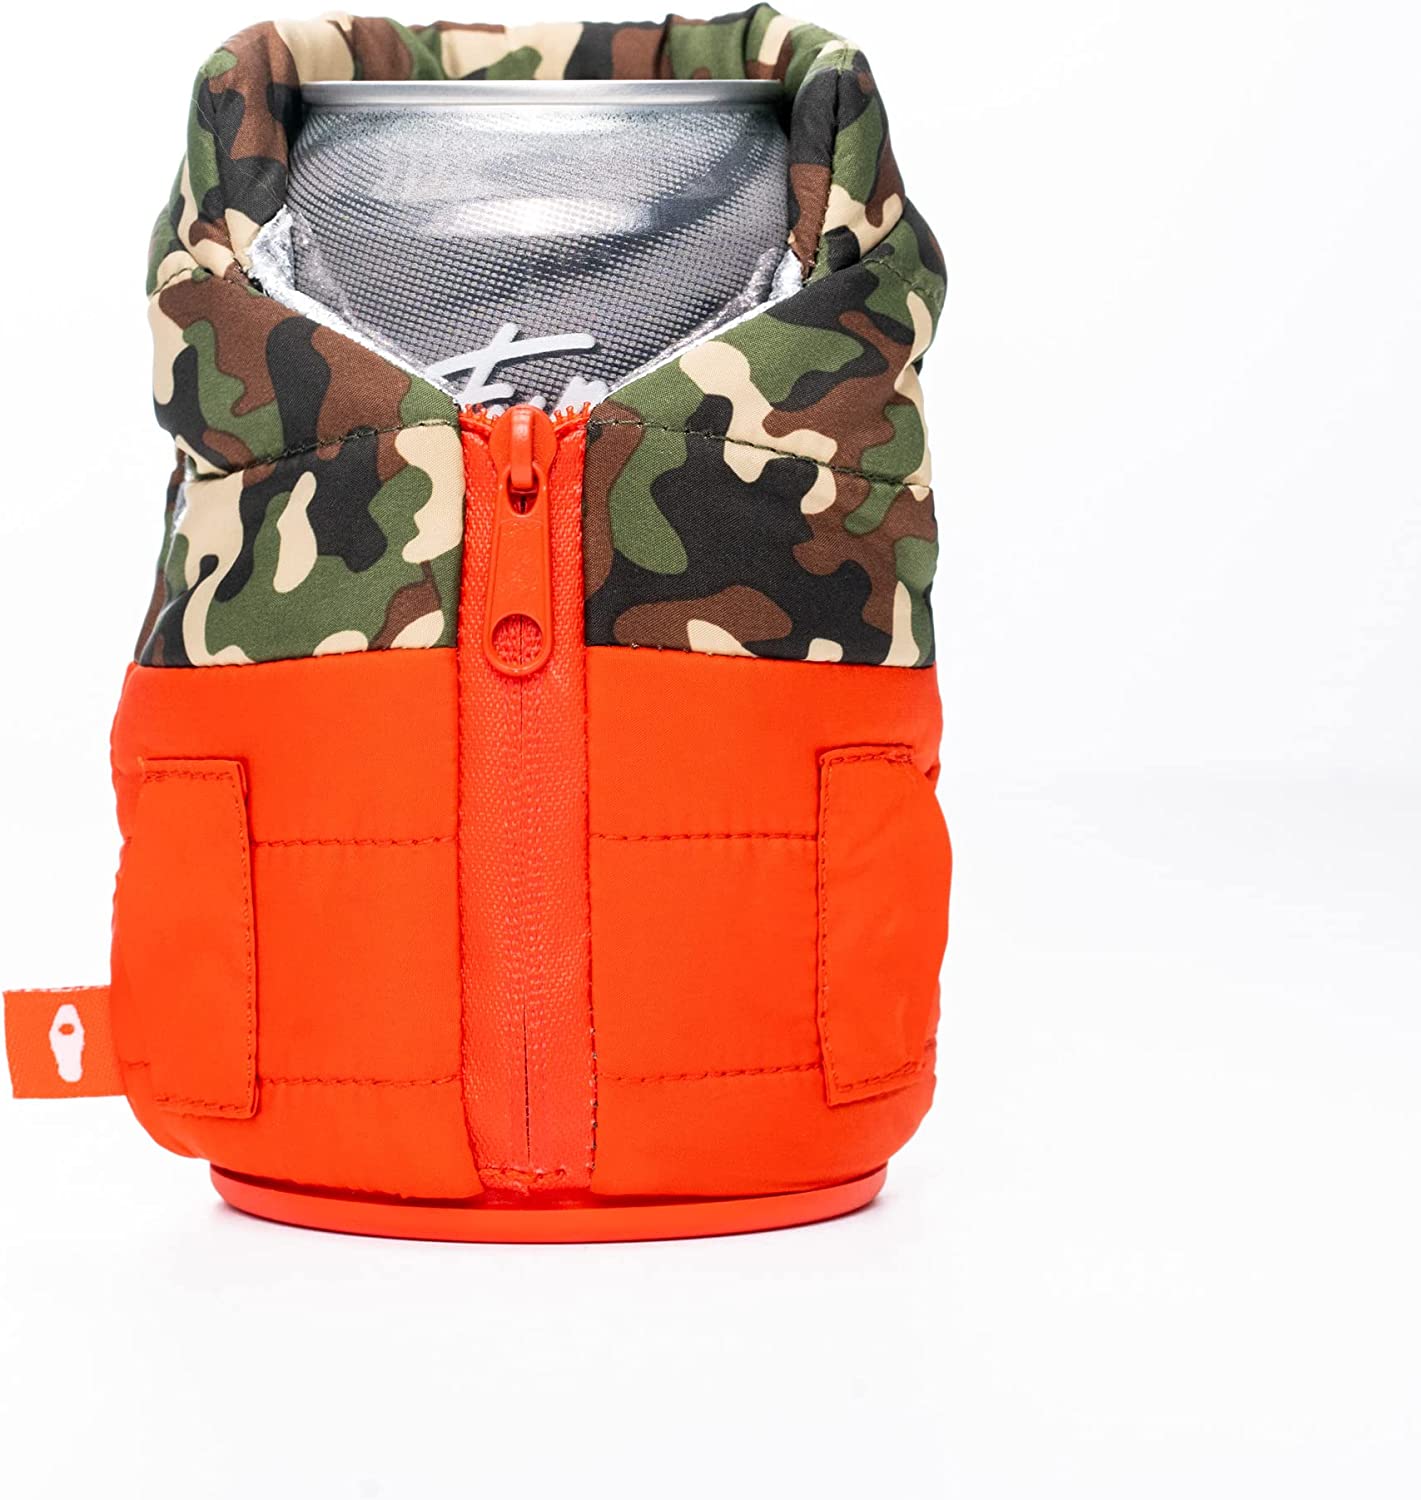 The Puffy Vest - Puffin Red/Woodsy Camo